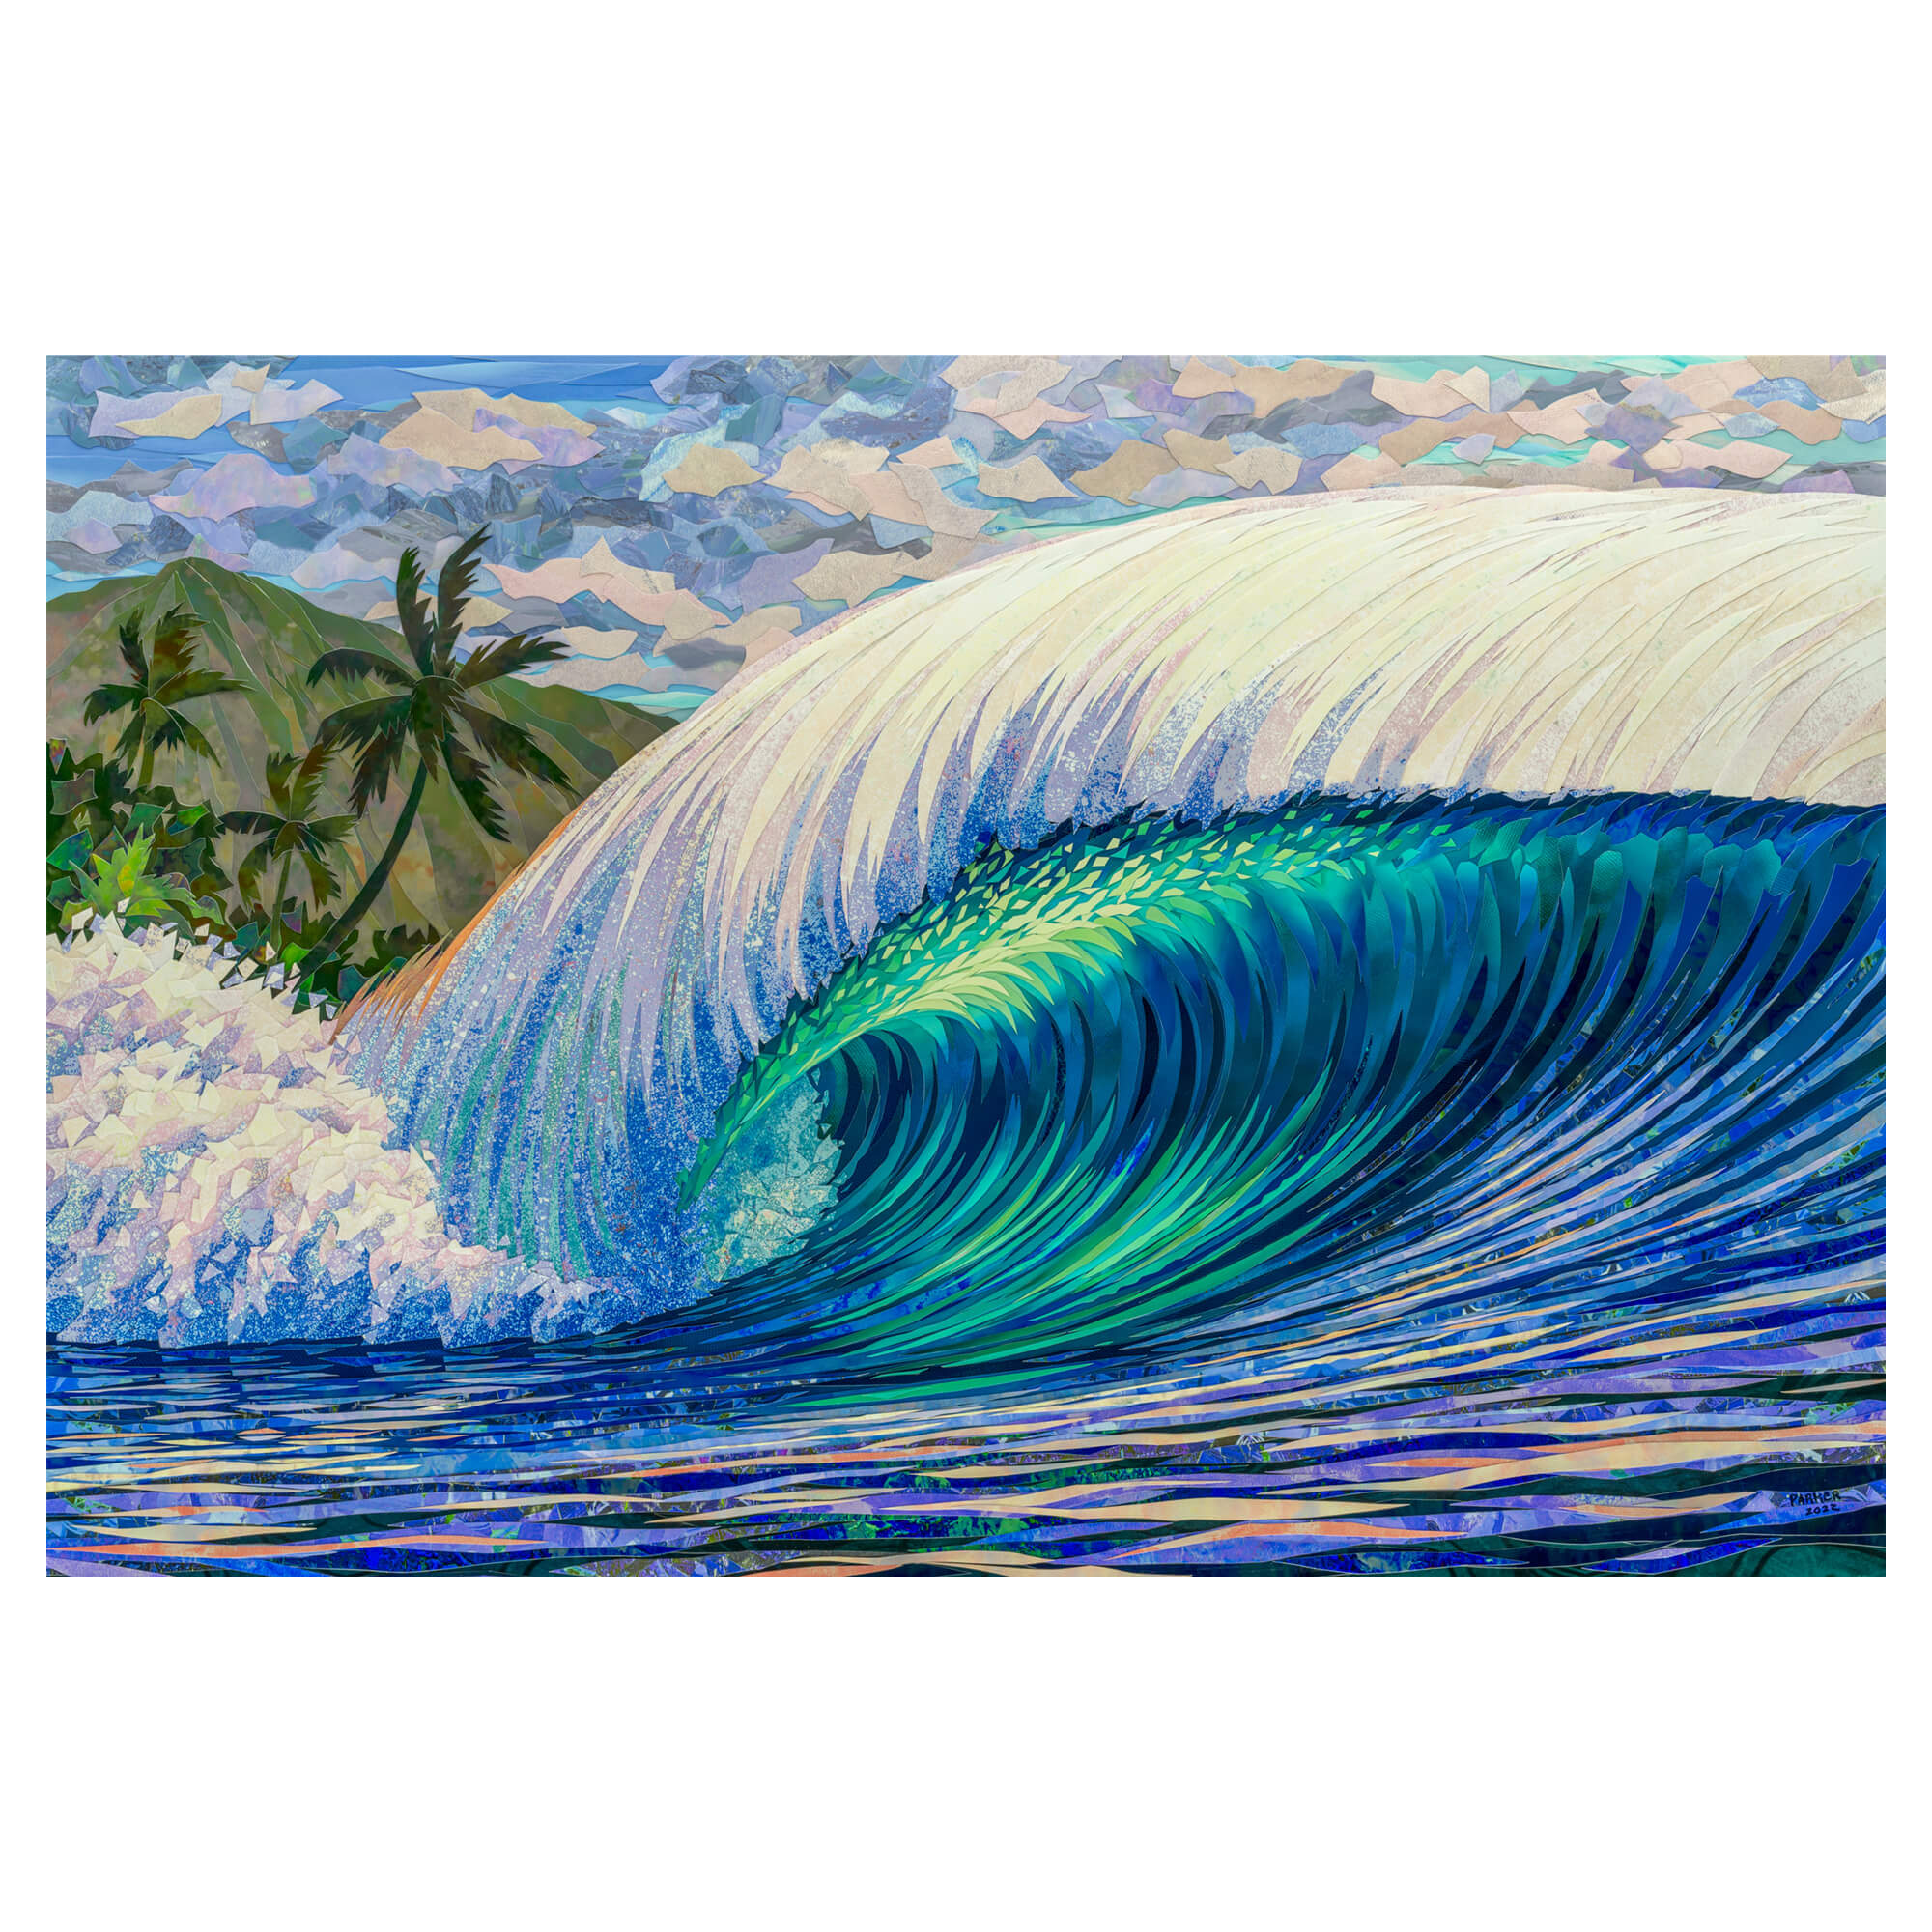 A canvas giclée art print featuring a collage of a large colorful rolling wave and a beautiful mountain background by Hawaii artist Patrick Parker